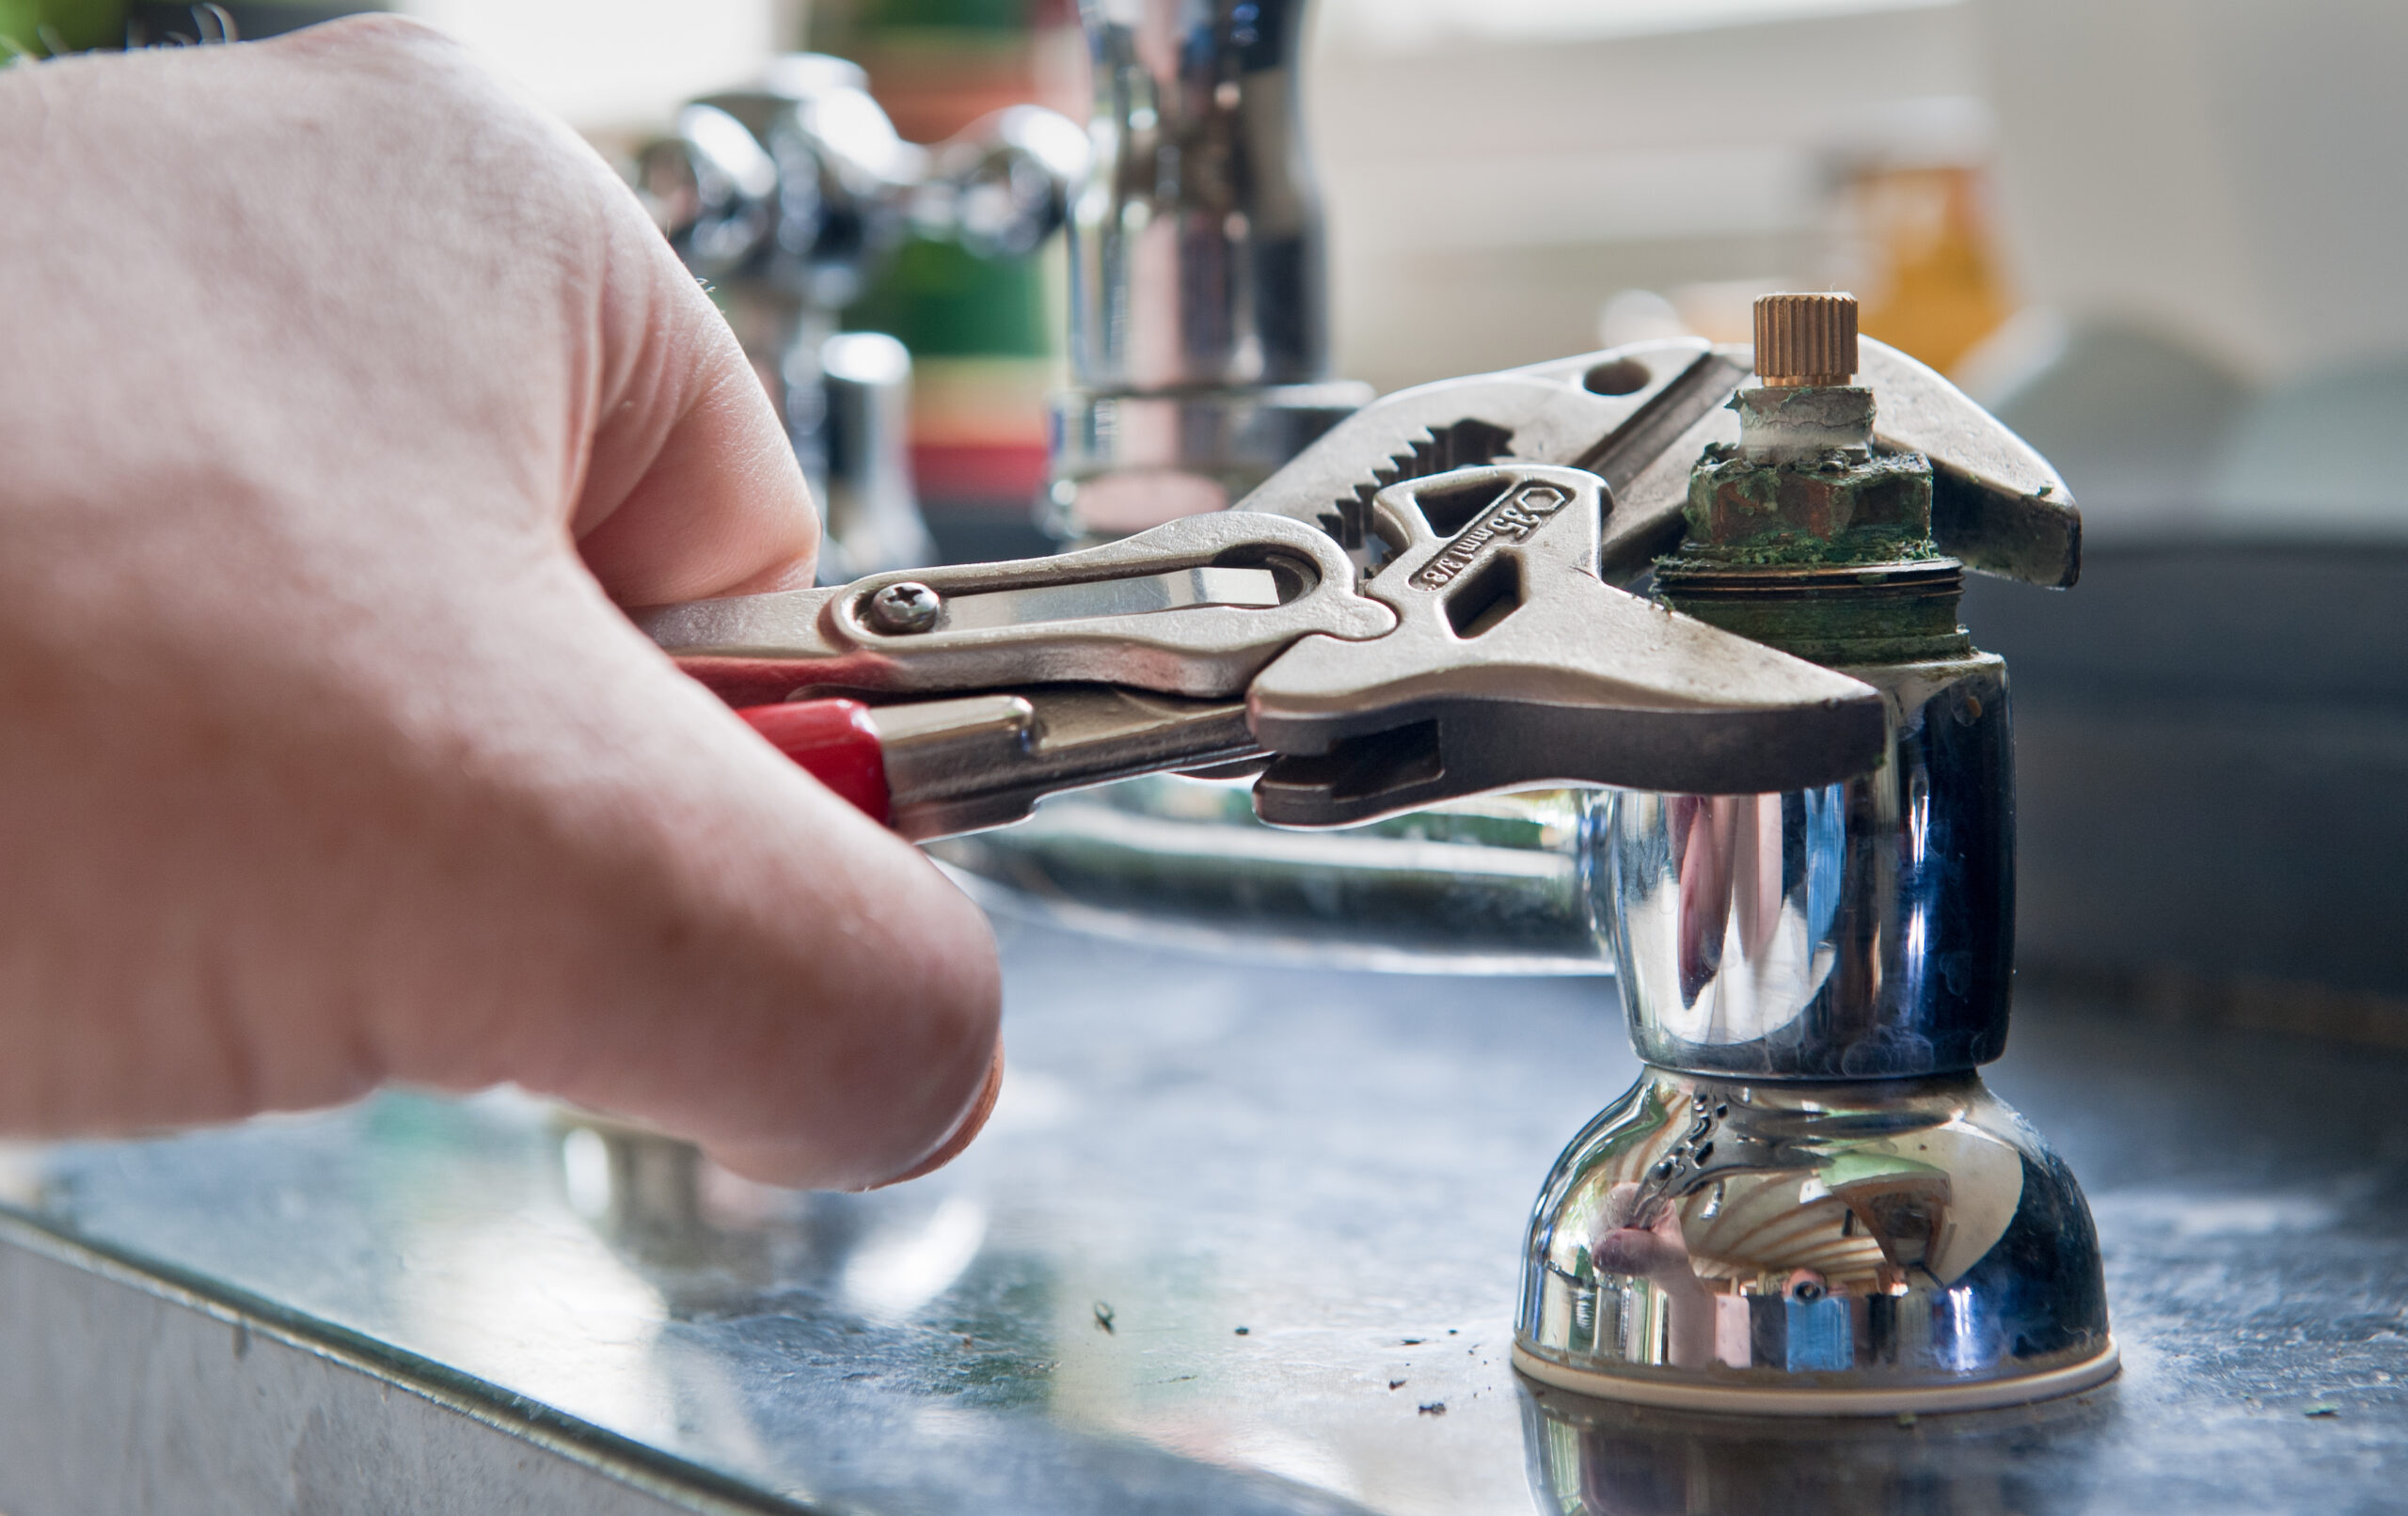 Plumber’s hand fixing a faucet with a wrench